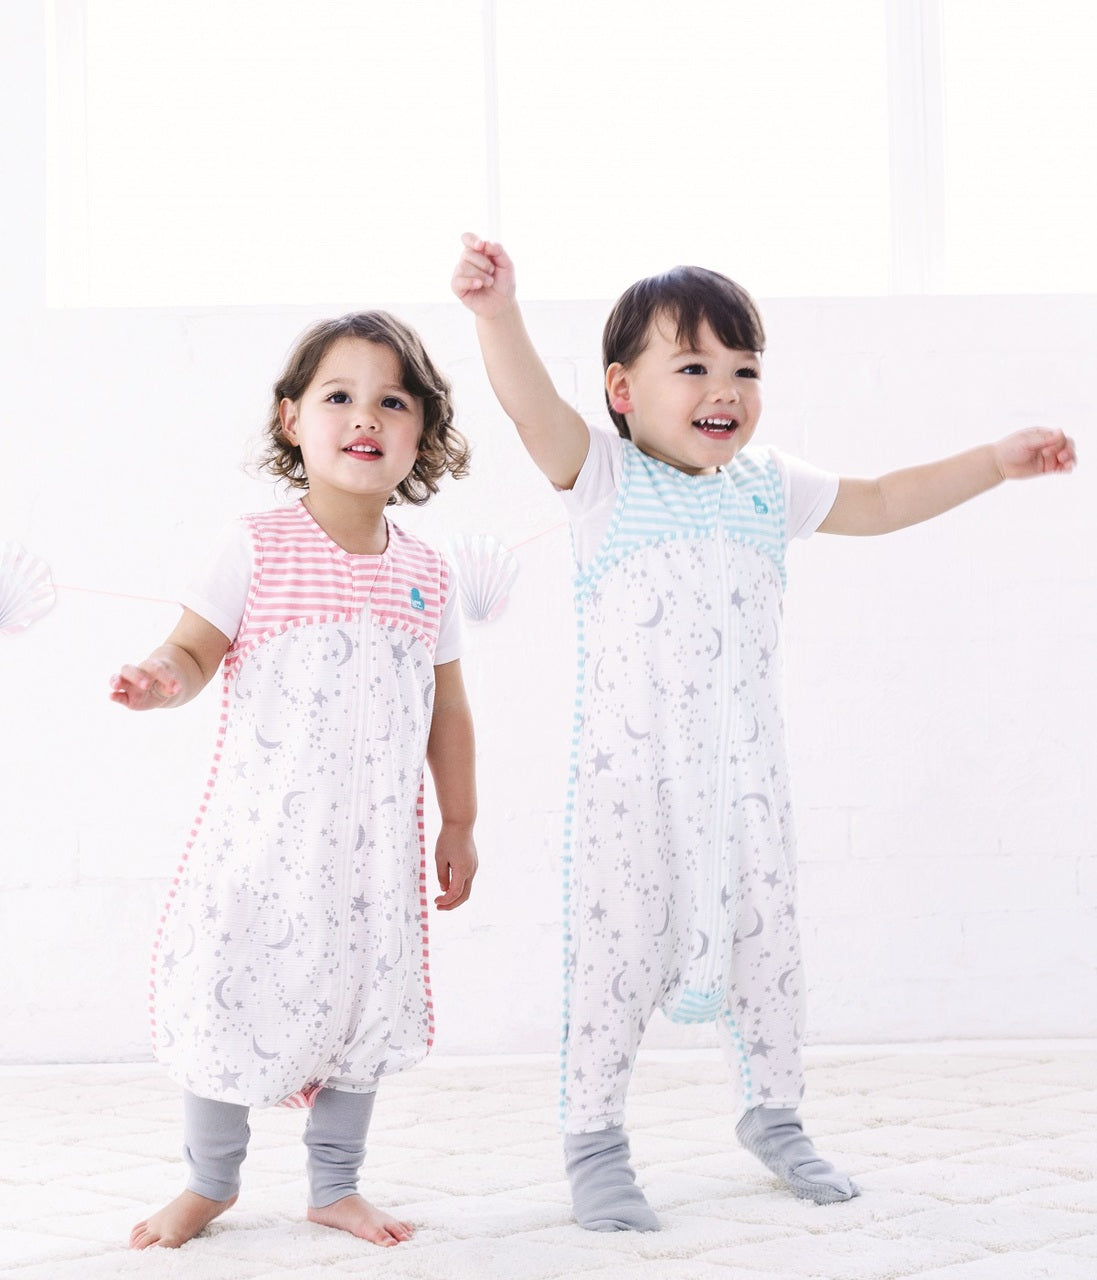 The Love to Dream Sleep Suit Lite is the perfect summer sleepsuit for your growing young one. The ‘2 in 1’ feet can be covered for bedtime, or uncovered for playtime. The foot cuffs are made from jersey-knit cotton for extra snugness and feature anti-slip dots for safer play. 